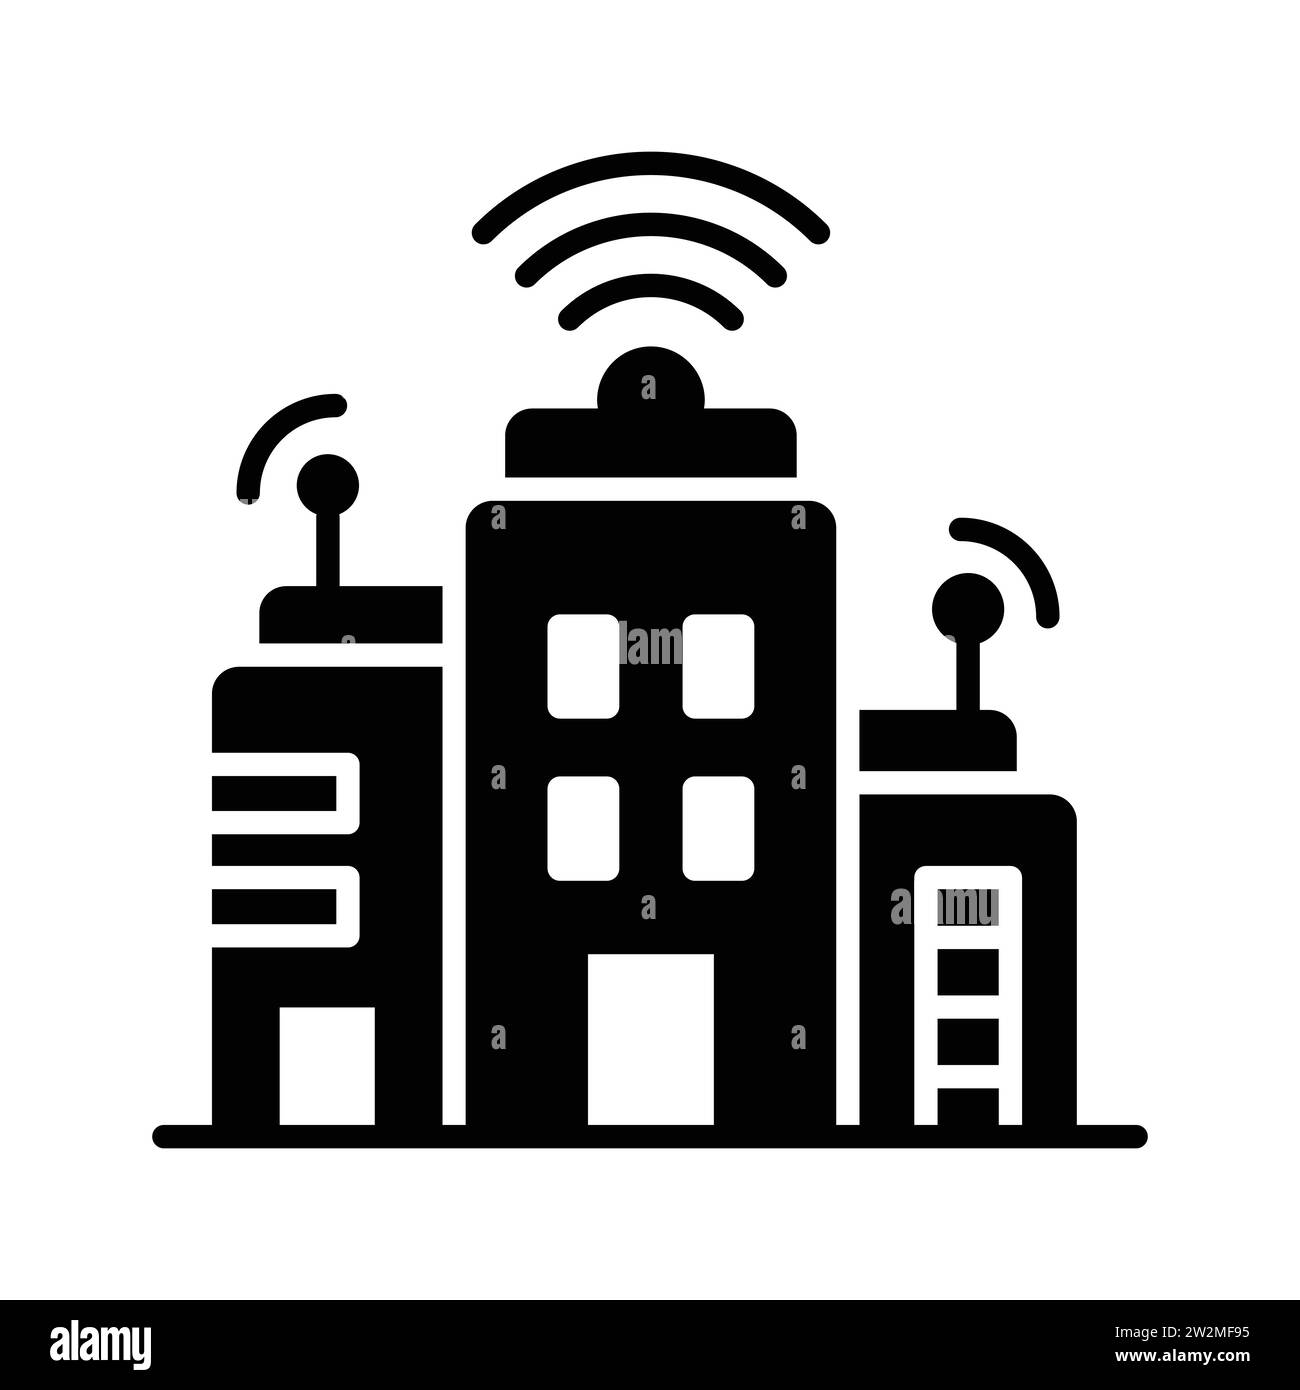 Grab this creatively designed smart city icon in trendy style, 5G technology vector Stock Vector